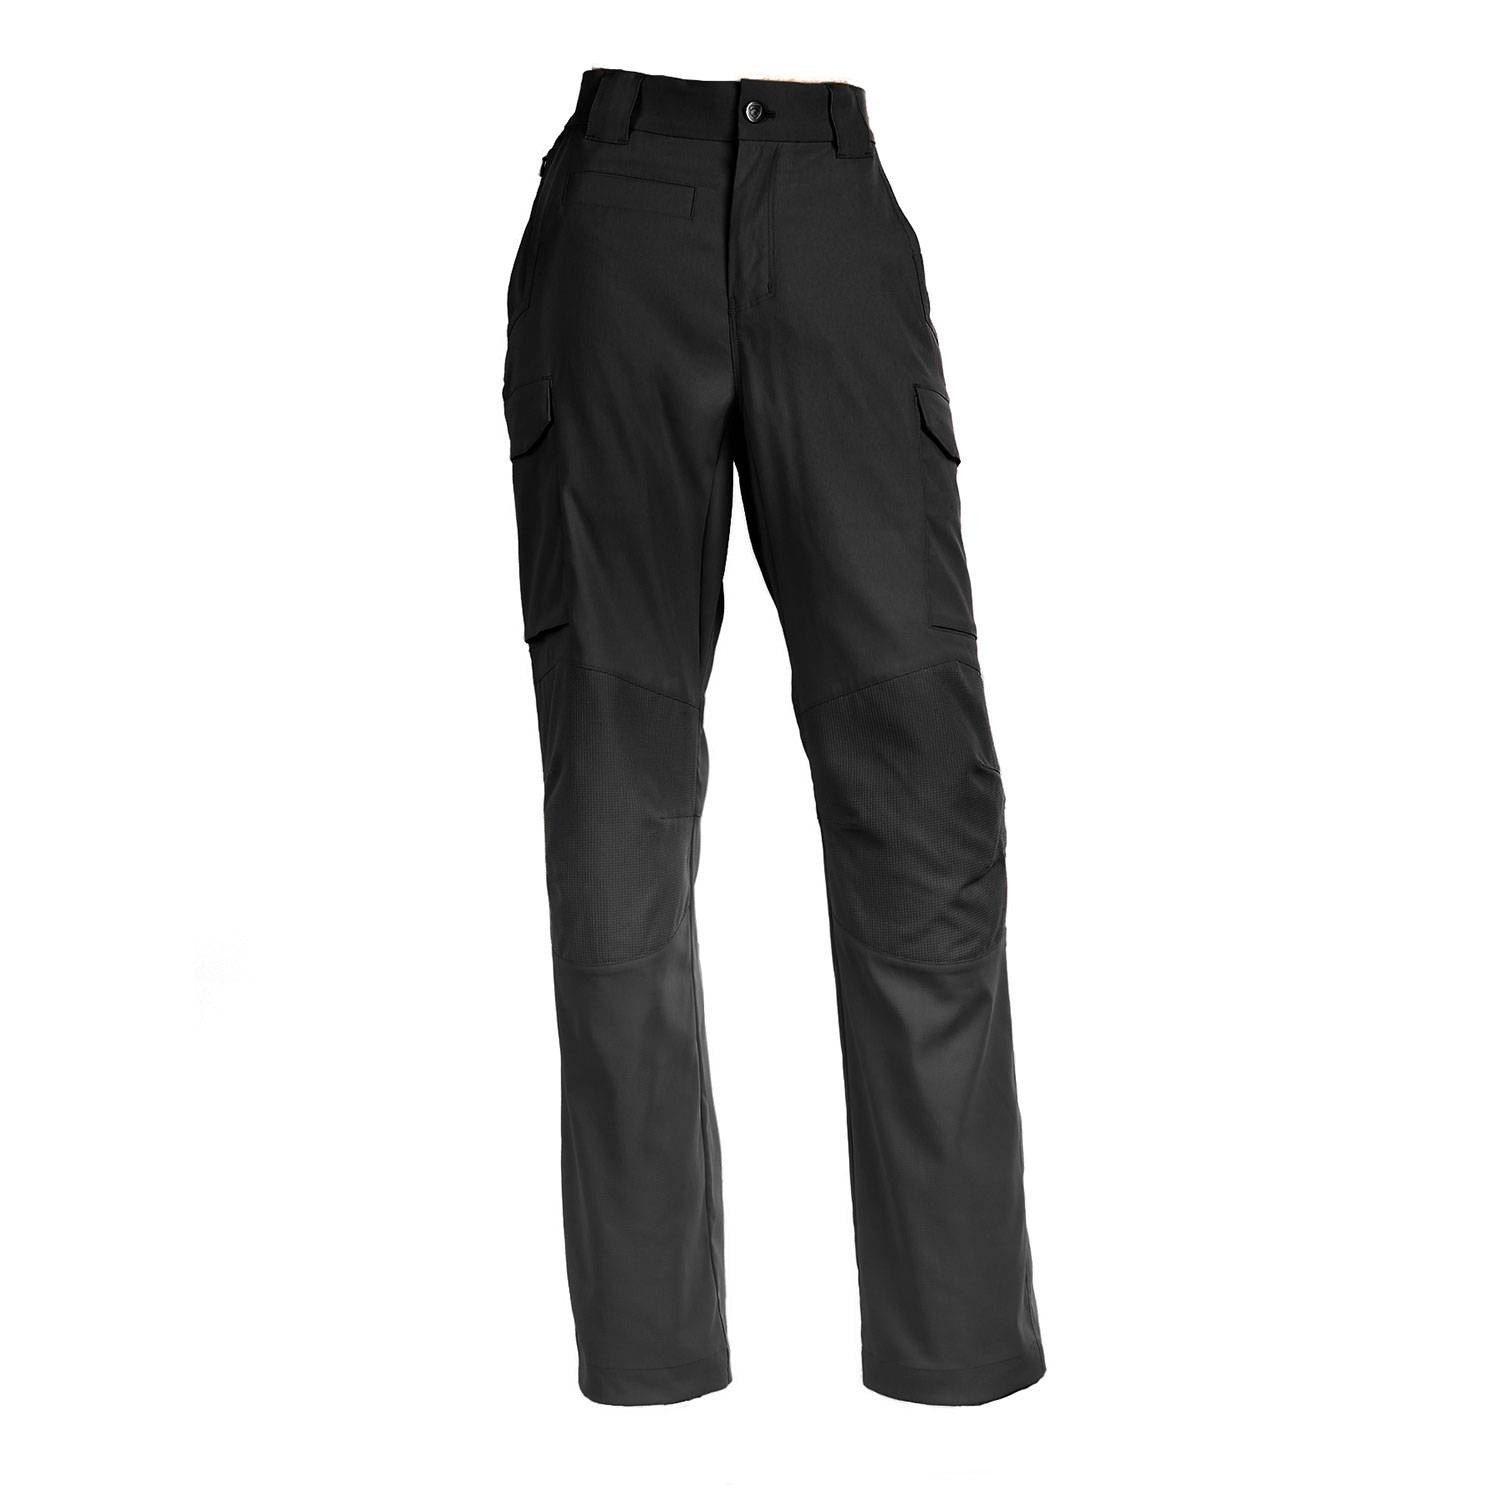 Women's Stretch Woven Tapered Cargo Pants - All in Motion™ Black M